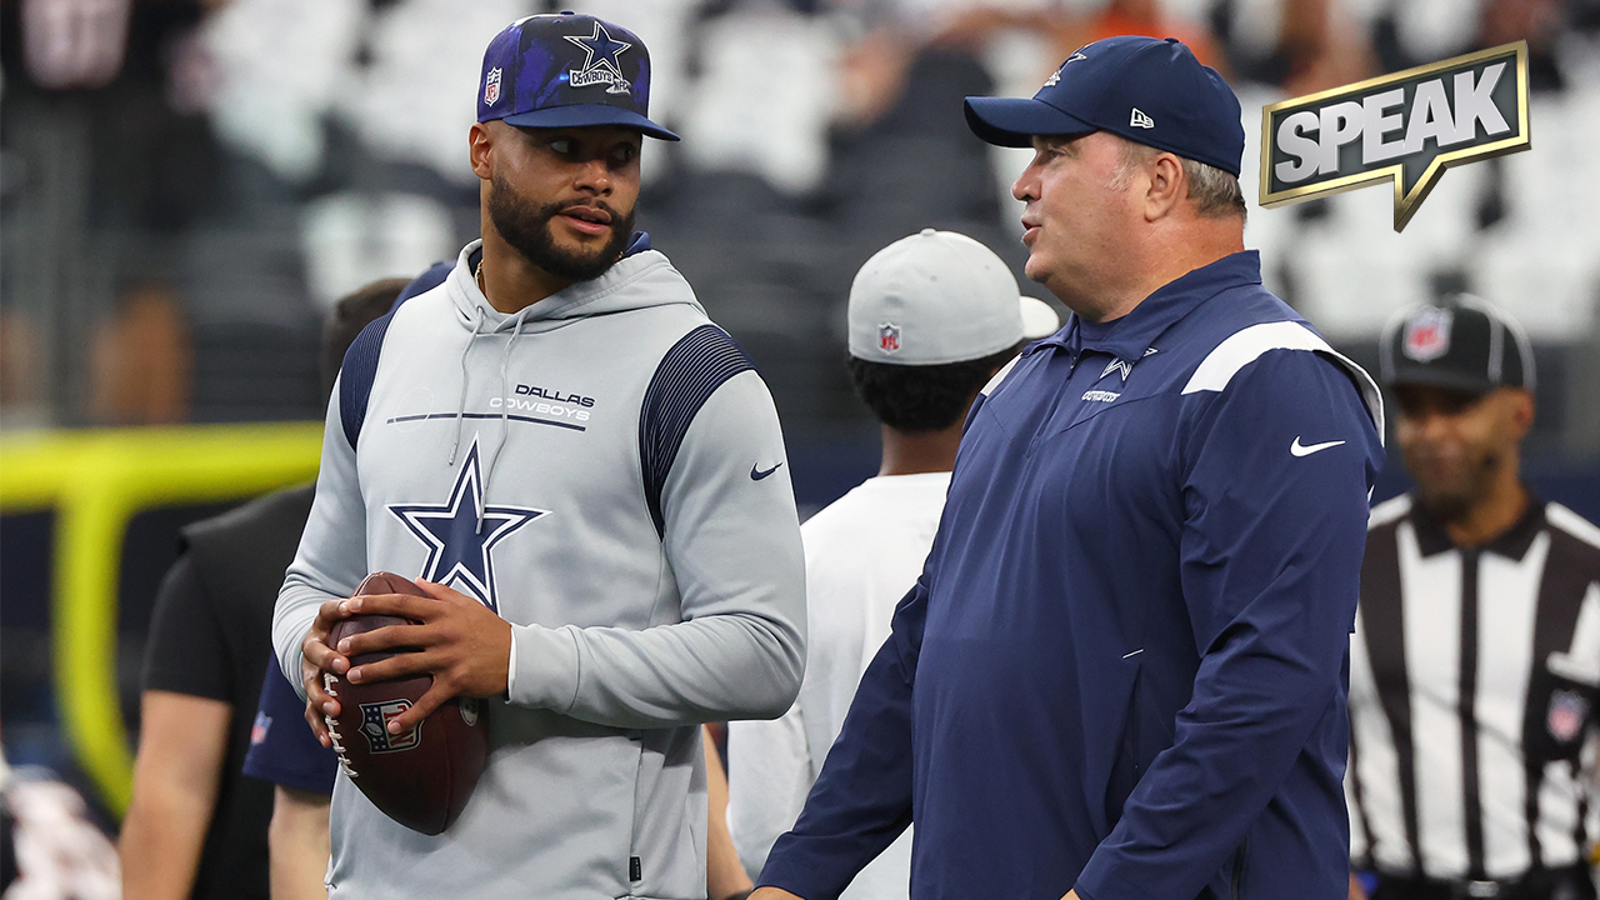 Should we expect Dak Prescott to improve with Mike McCarthy calling plays?